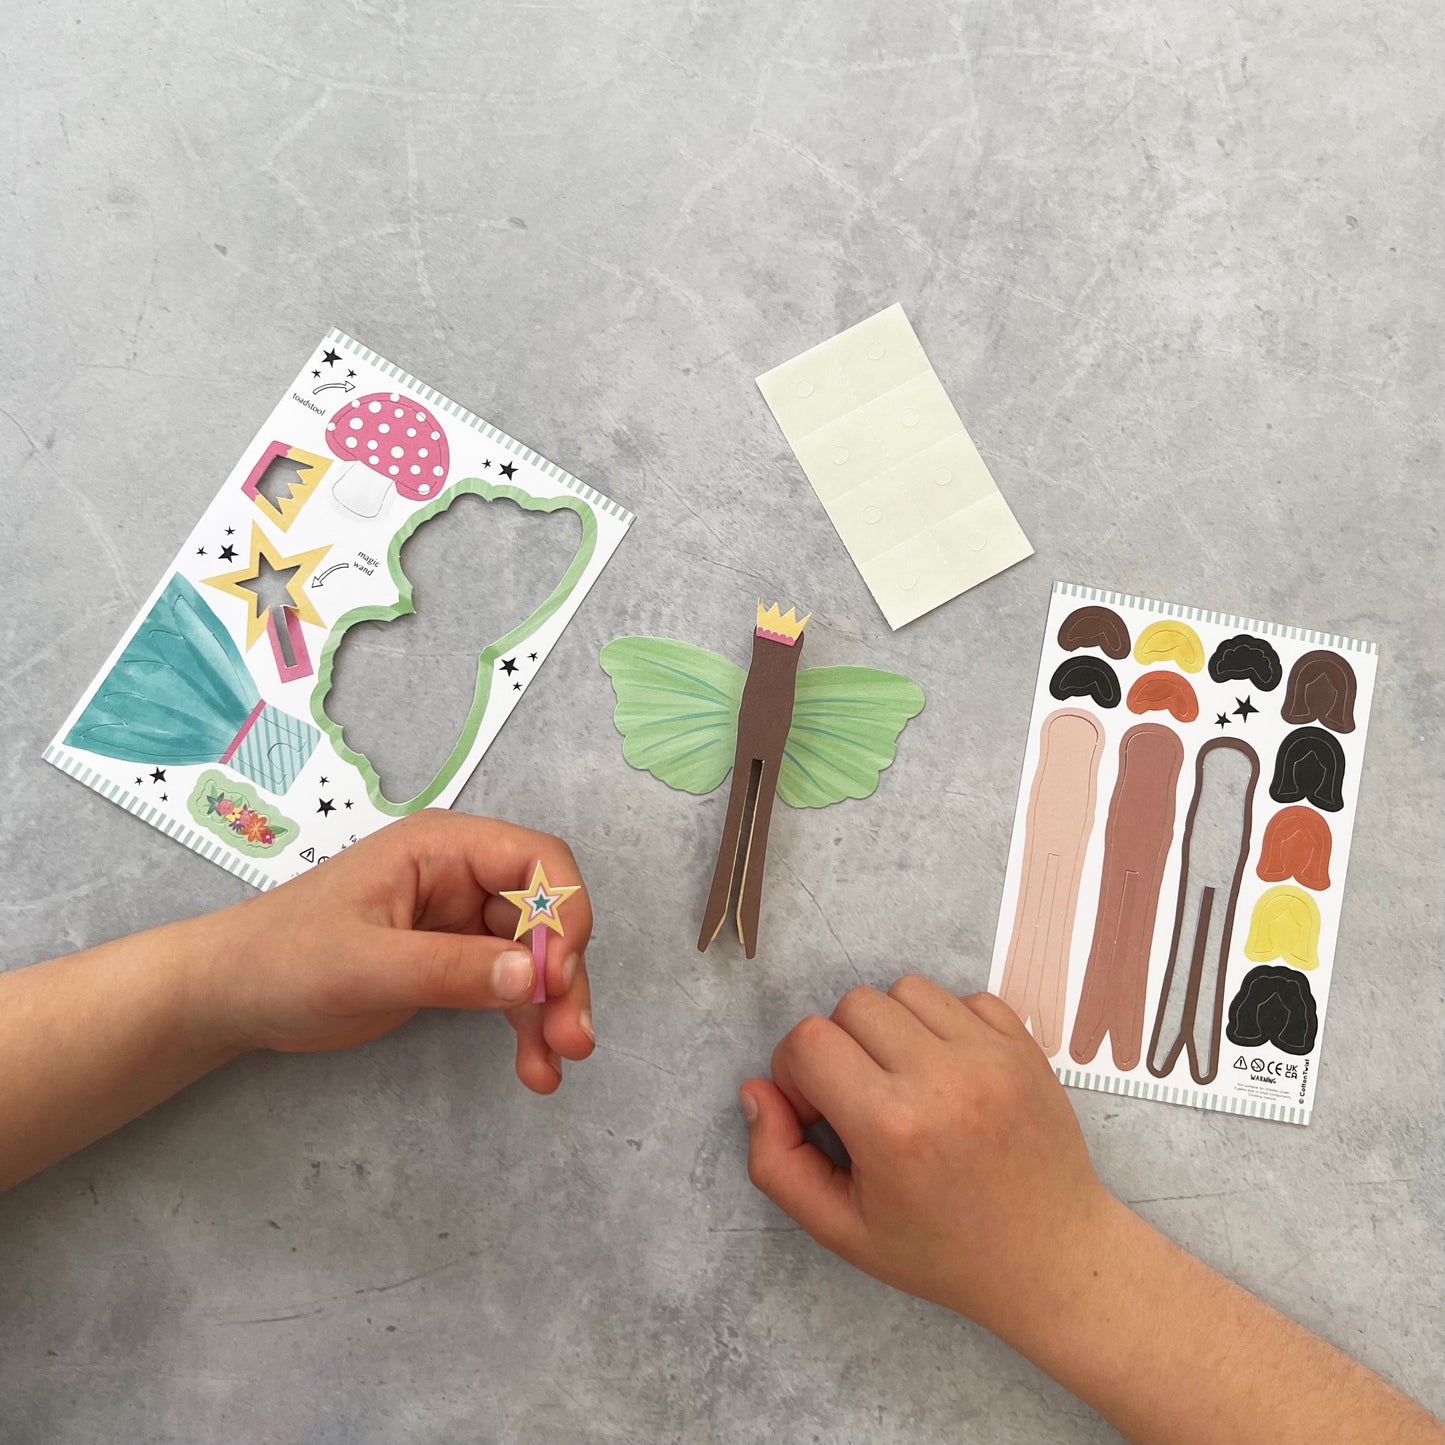 Children love to craft, create, & this peg doll is no exception. Not only a fun activity, this peg doll also sparks imaginative play. Each surfer, ballerina, or fairy comes with a variety of options for personalization! Each kit is plastic free & lovingly assembled by hand.